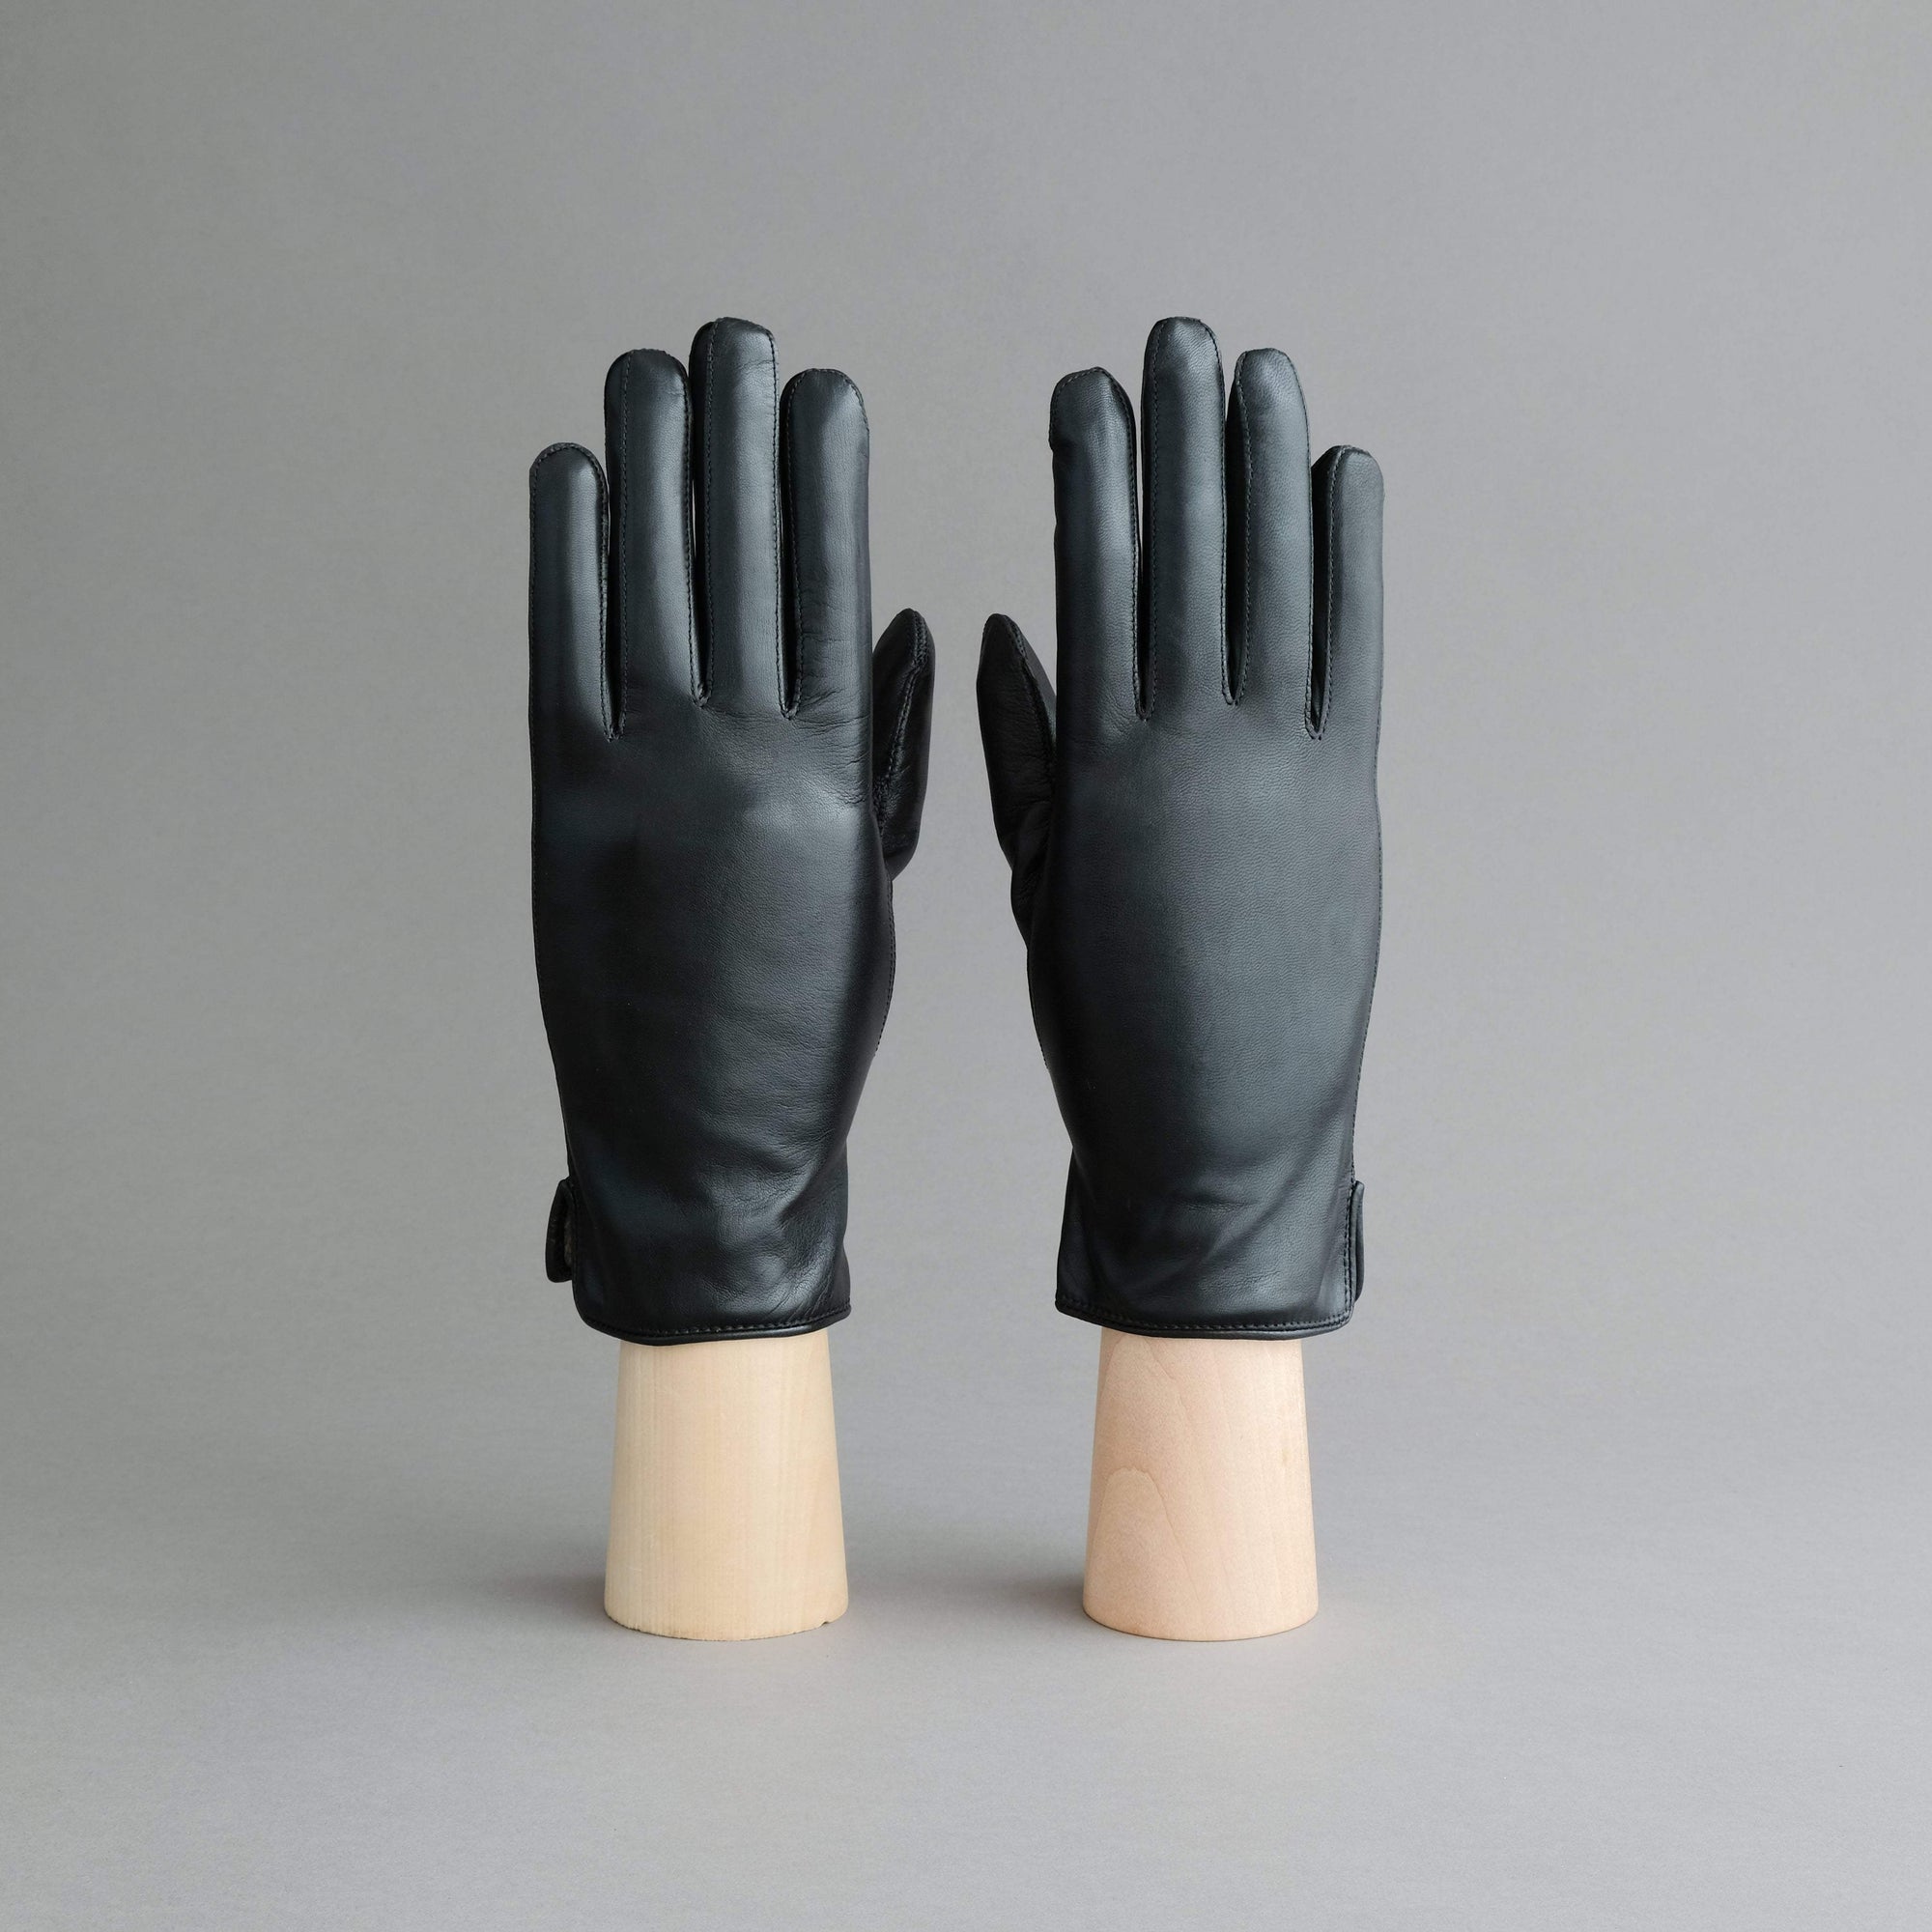 Ladies Gloves from Black Hair Sheep Nappa lined with Cashmere - TR Handschuhe Wien - Thomas Riemer Handmade Gloves